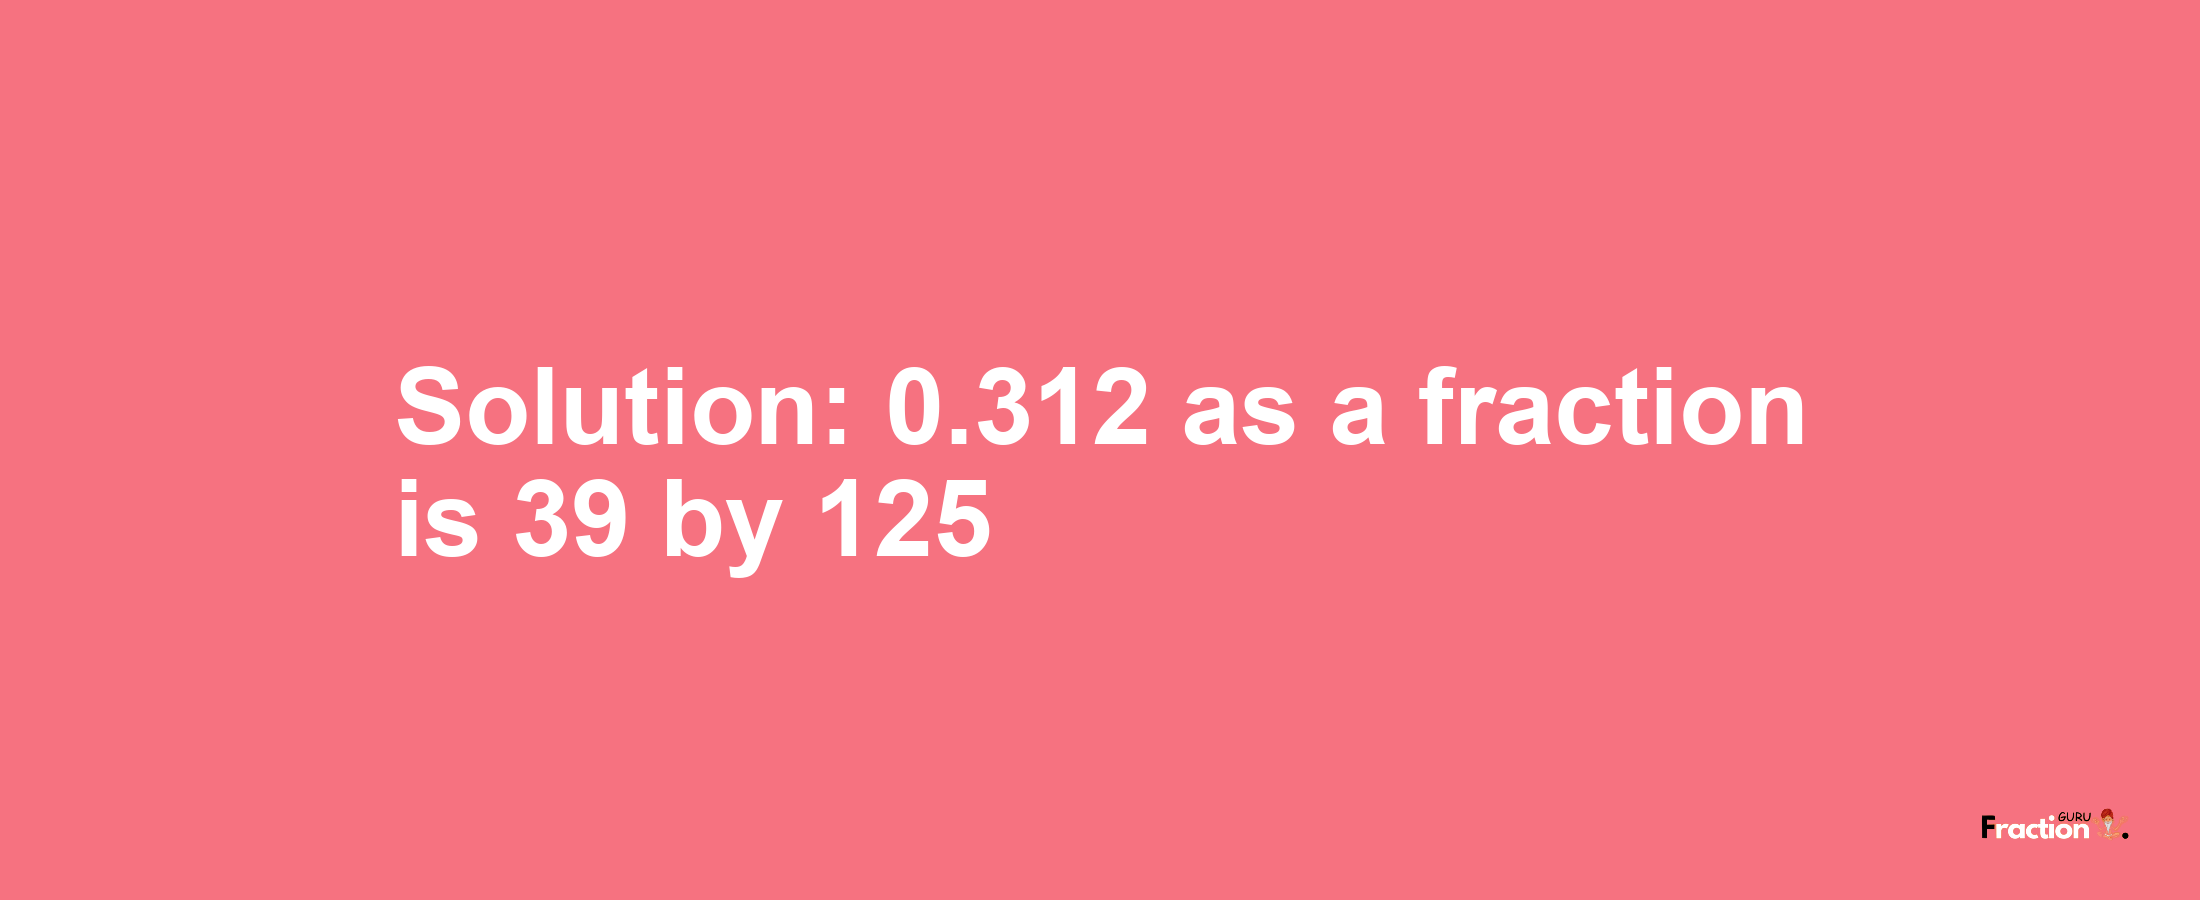 Solution:0.312 as a fraction is 39/125